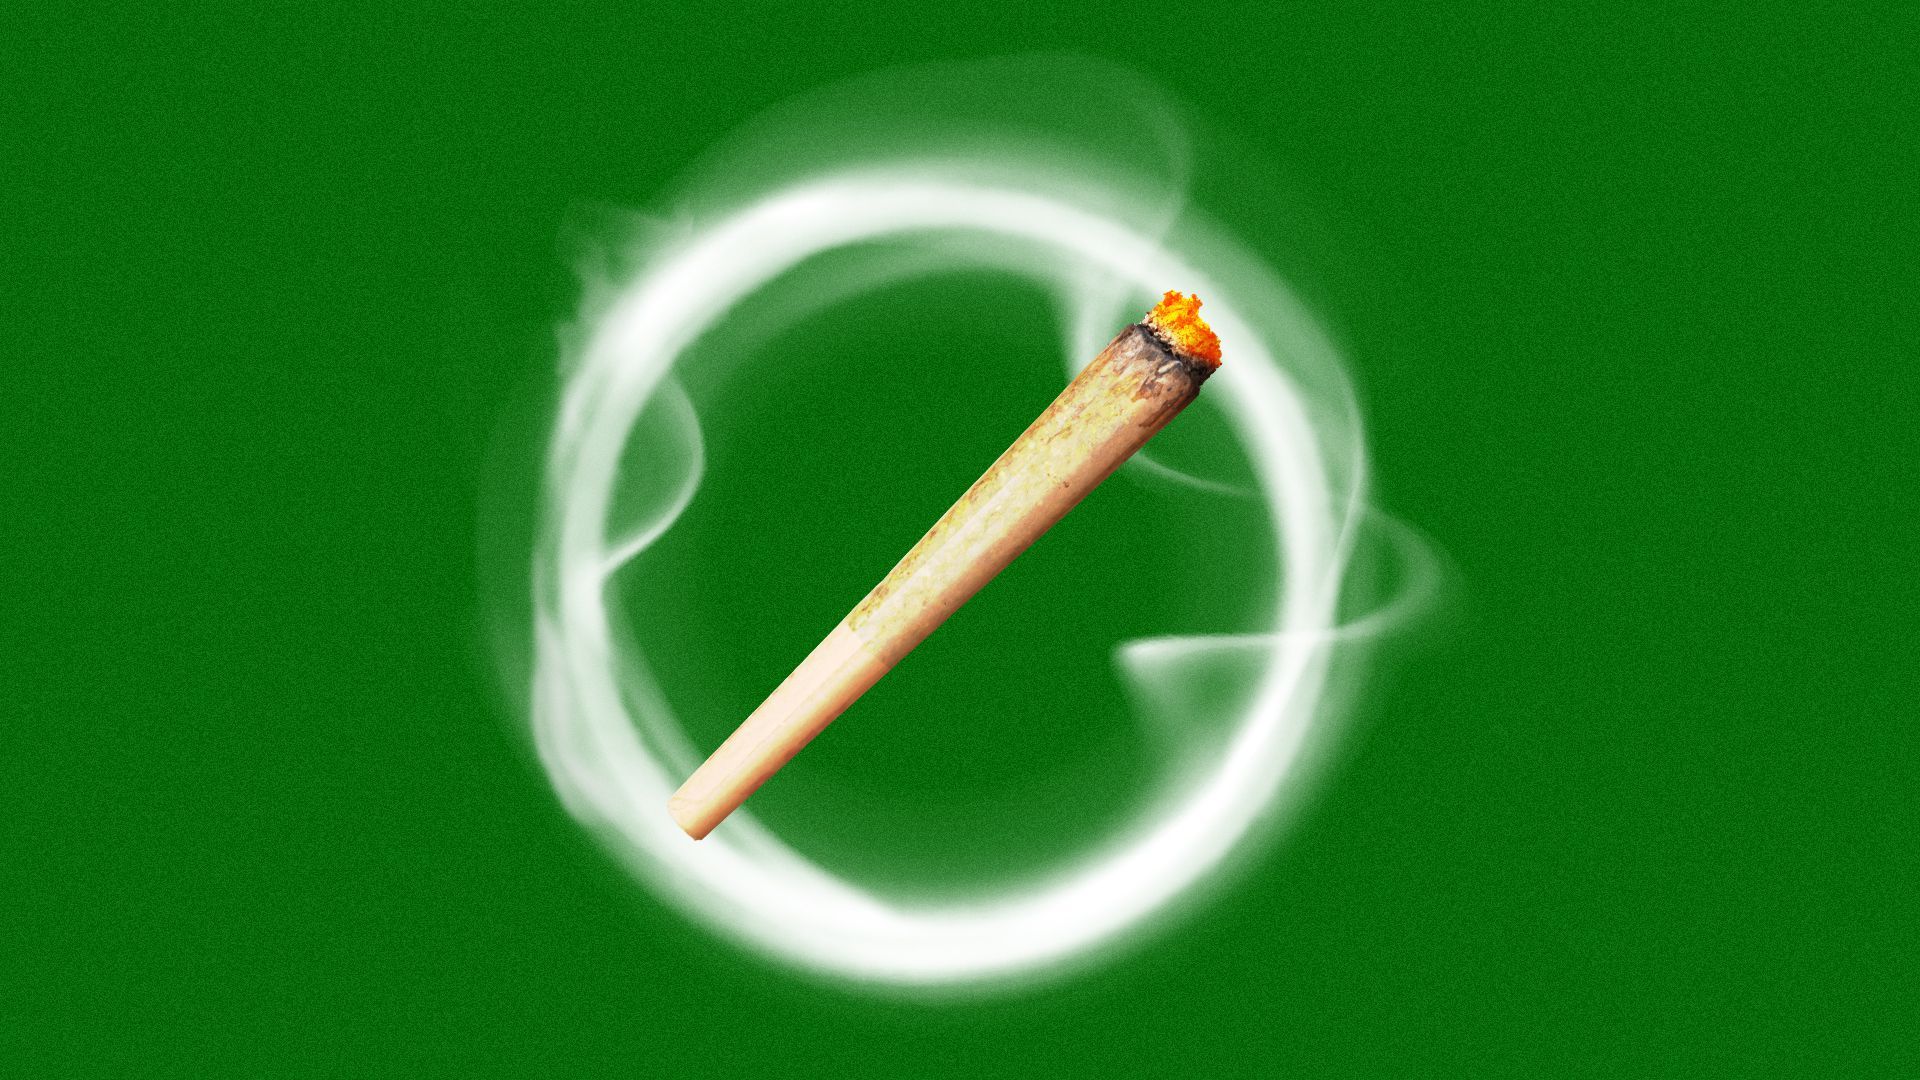 Illustration of a "no" symbol in the shape of a joint and a ring of smoke